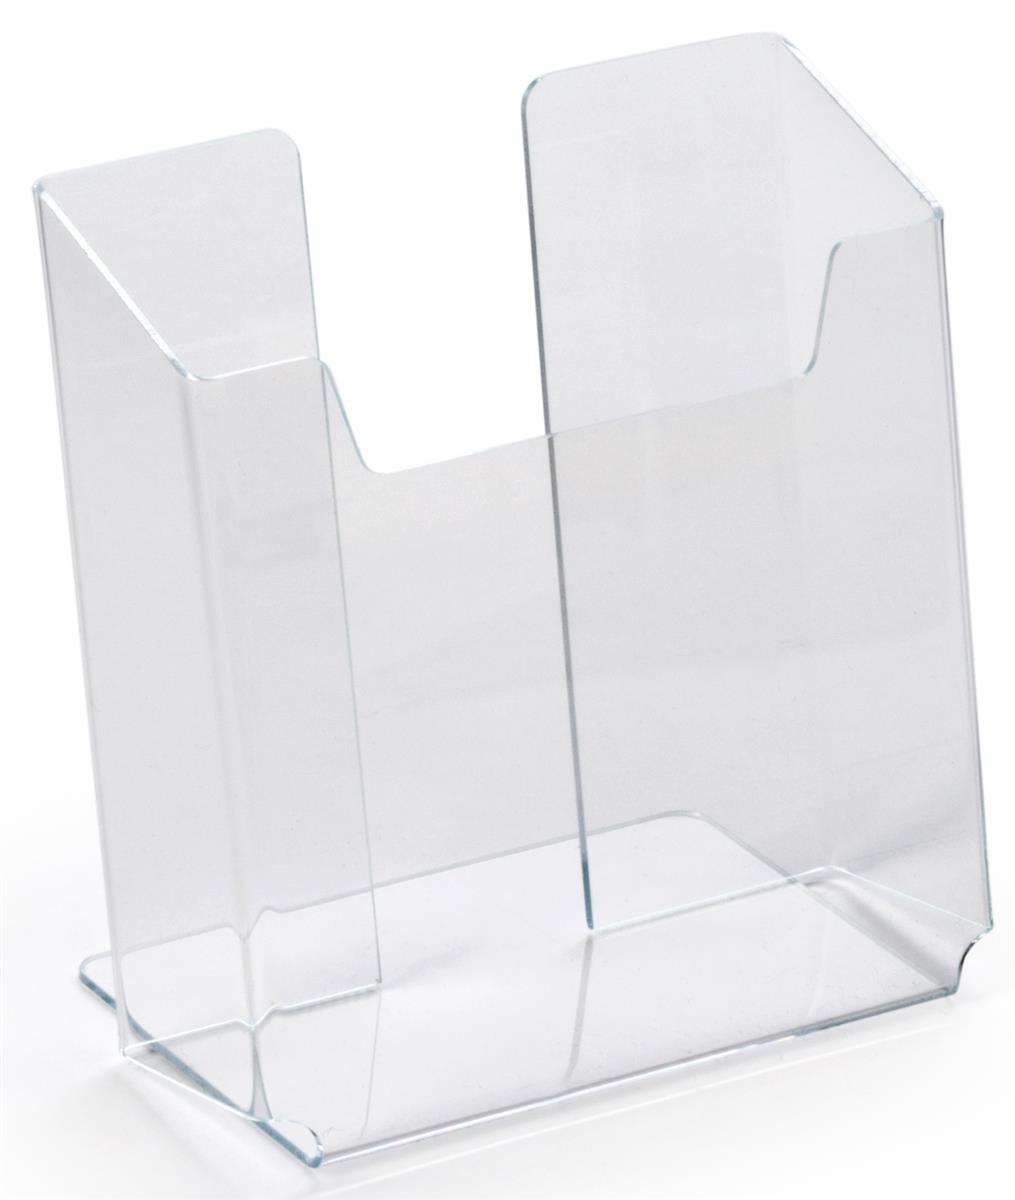 A5 Plastic Acrylic Brochure Holder Display Stand 4 Pocket Tier Counter Top BHA54